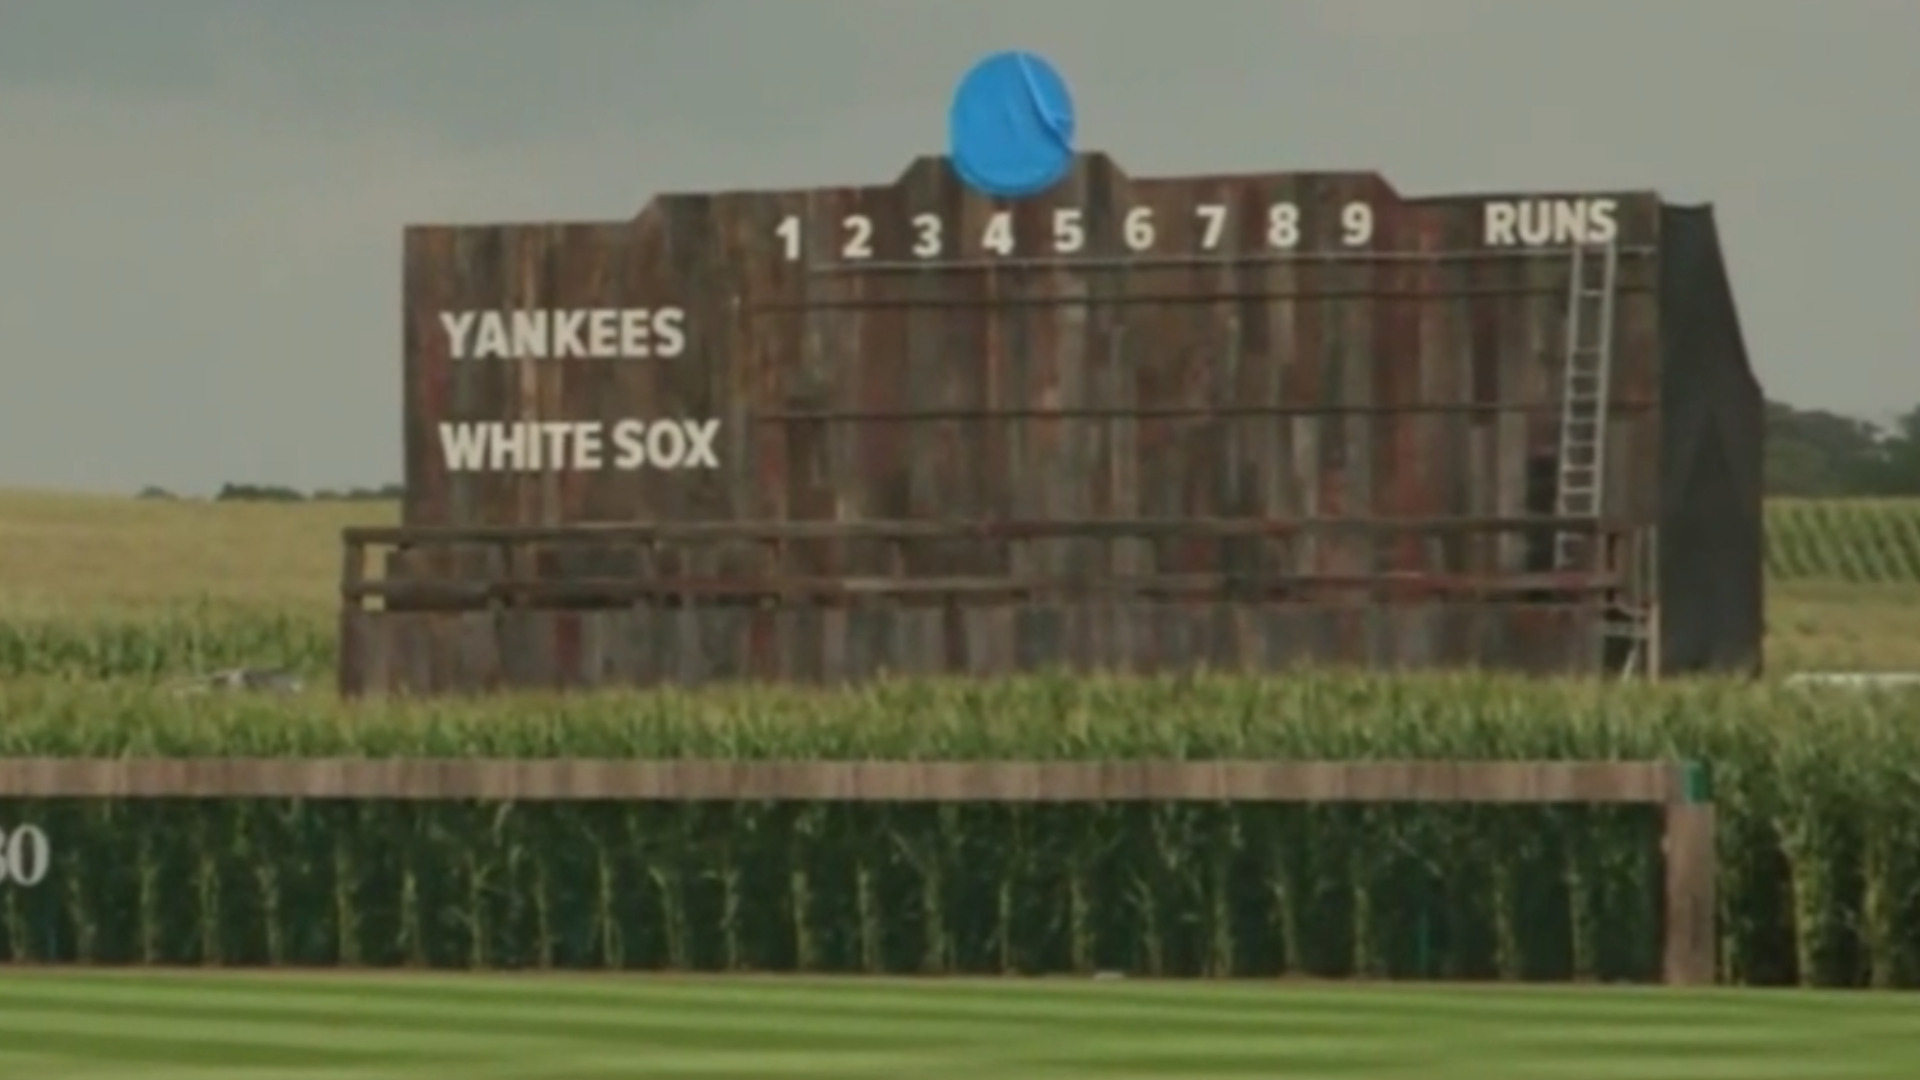 Watch CBS Evening News: Iowa hosts MLB game by Field of Dreams movie site  - Full show on CBS